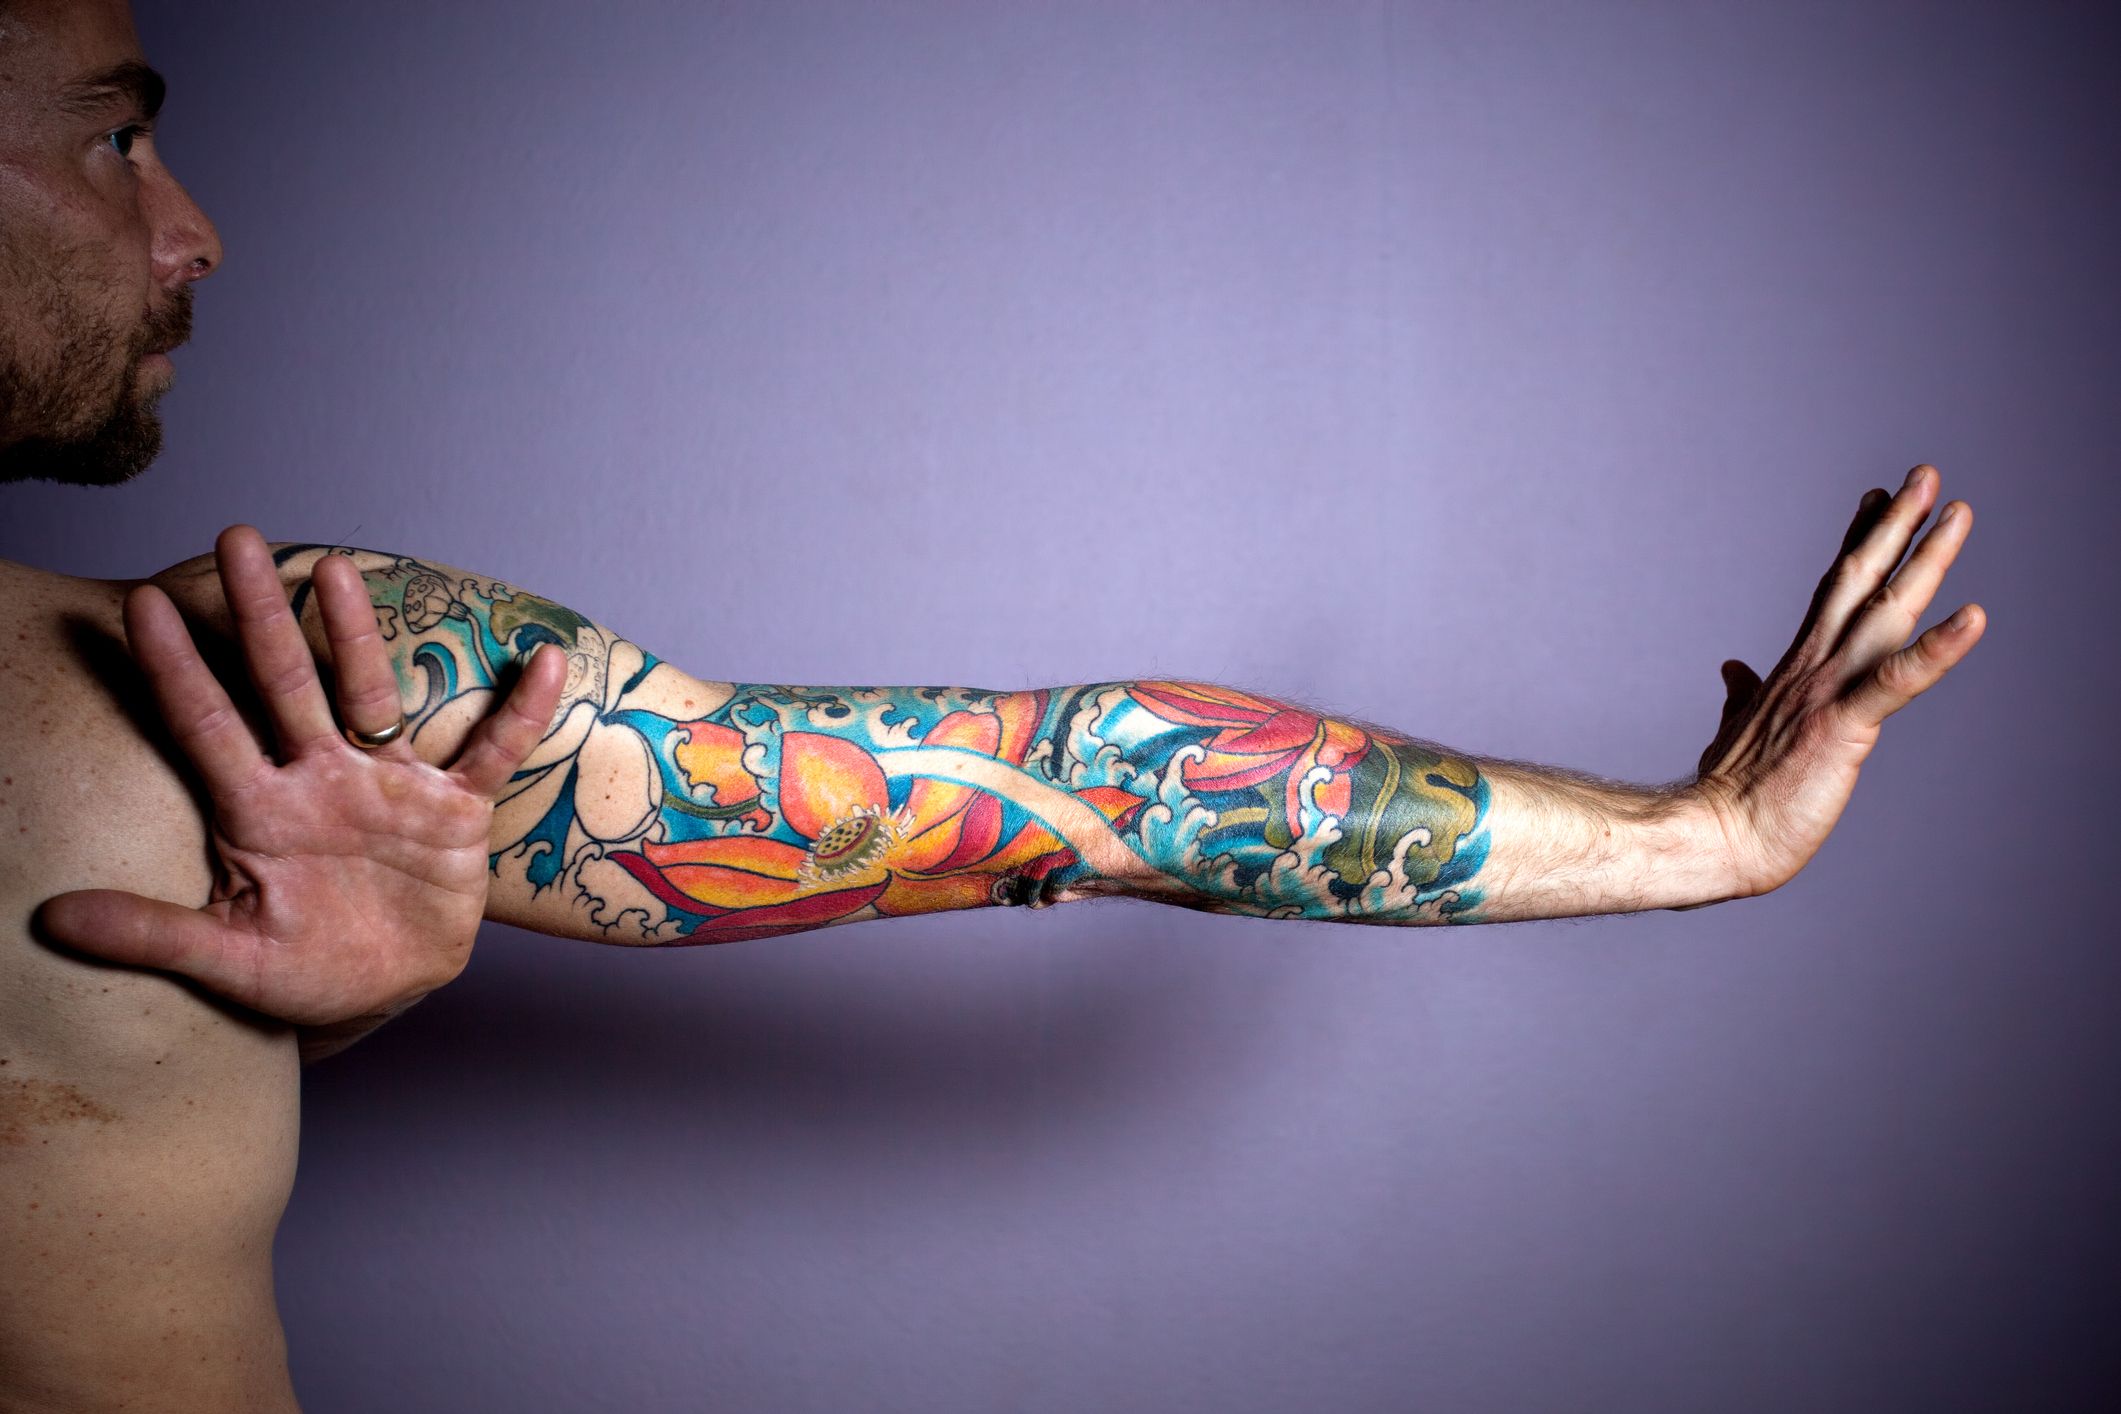 3 Men Shared the Epic Tattoos They Got to Cover Their Scars